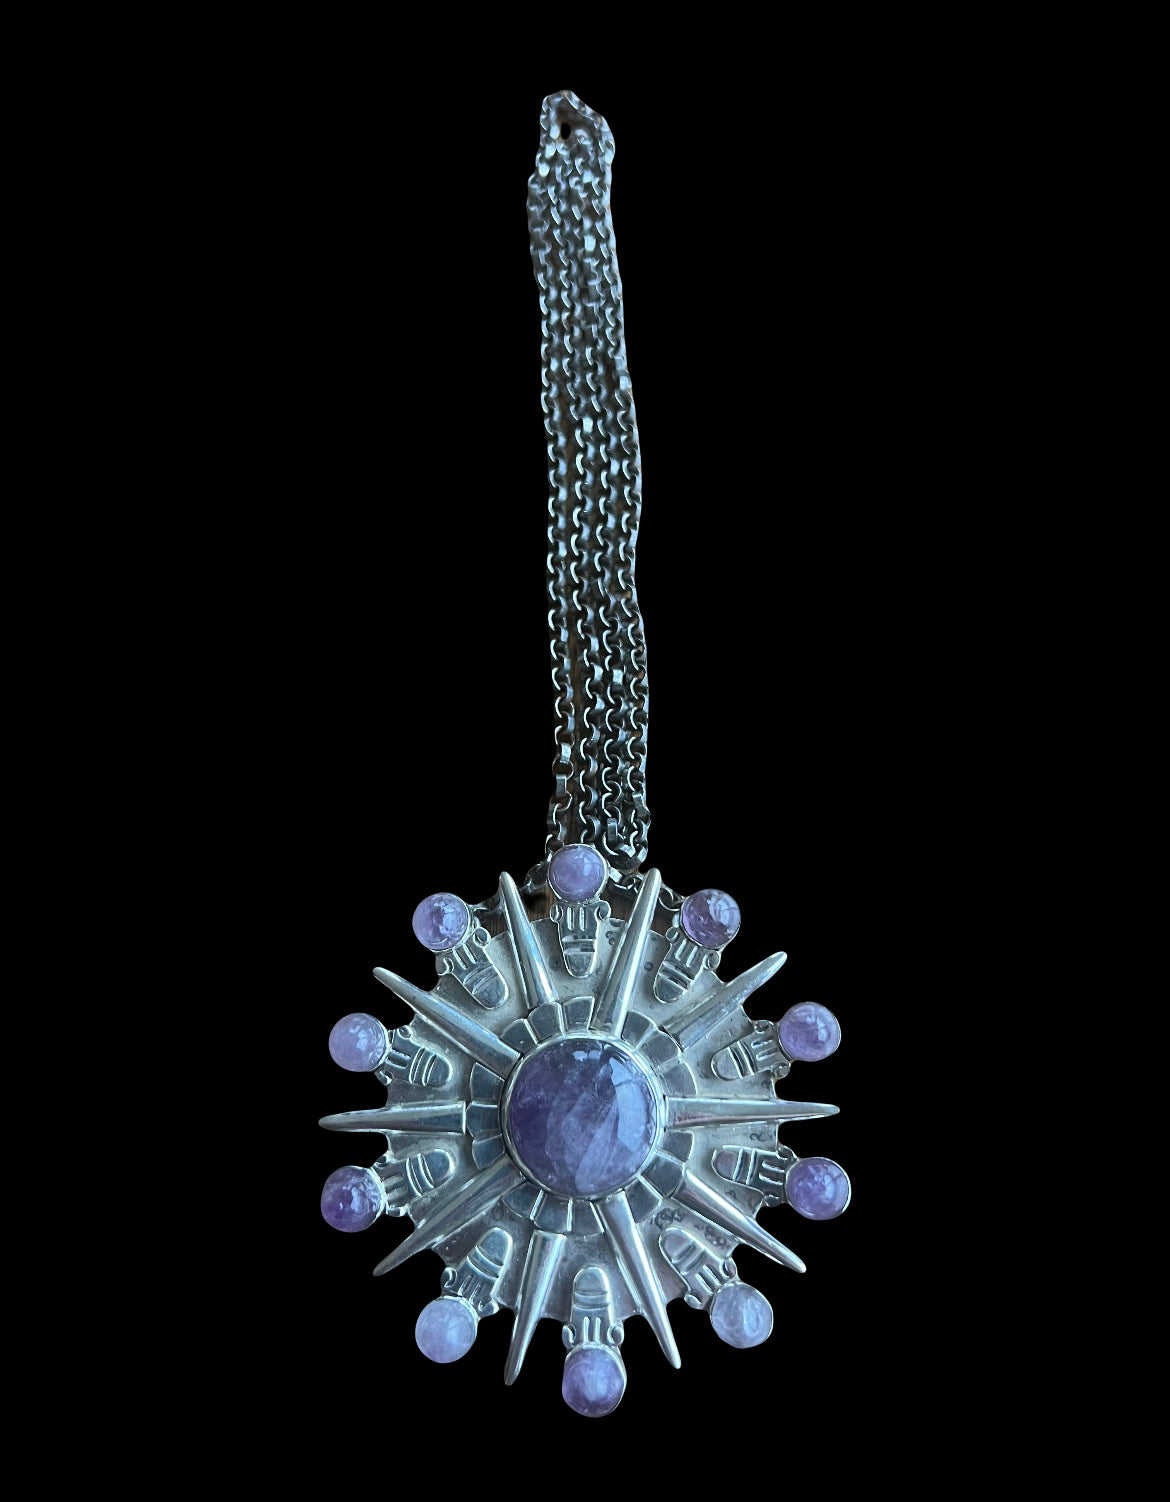 William Spratling LARGE Taxco Mexico Sterling Silver Amethyst Sunburst Necklace ca. 1940s